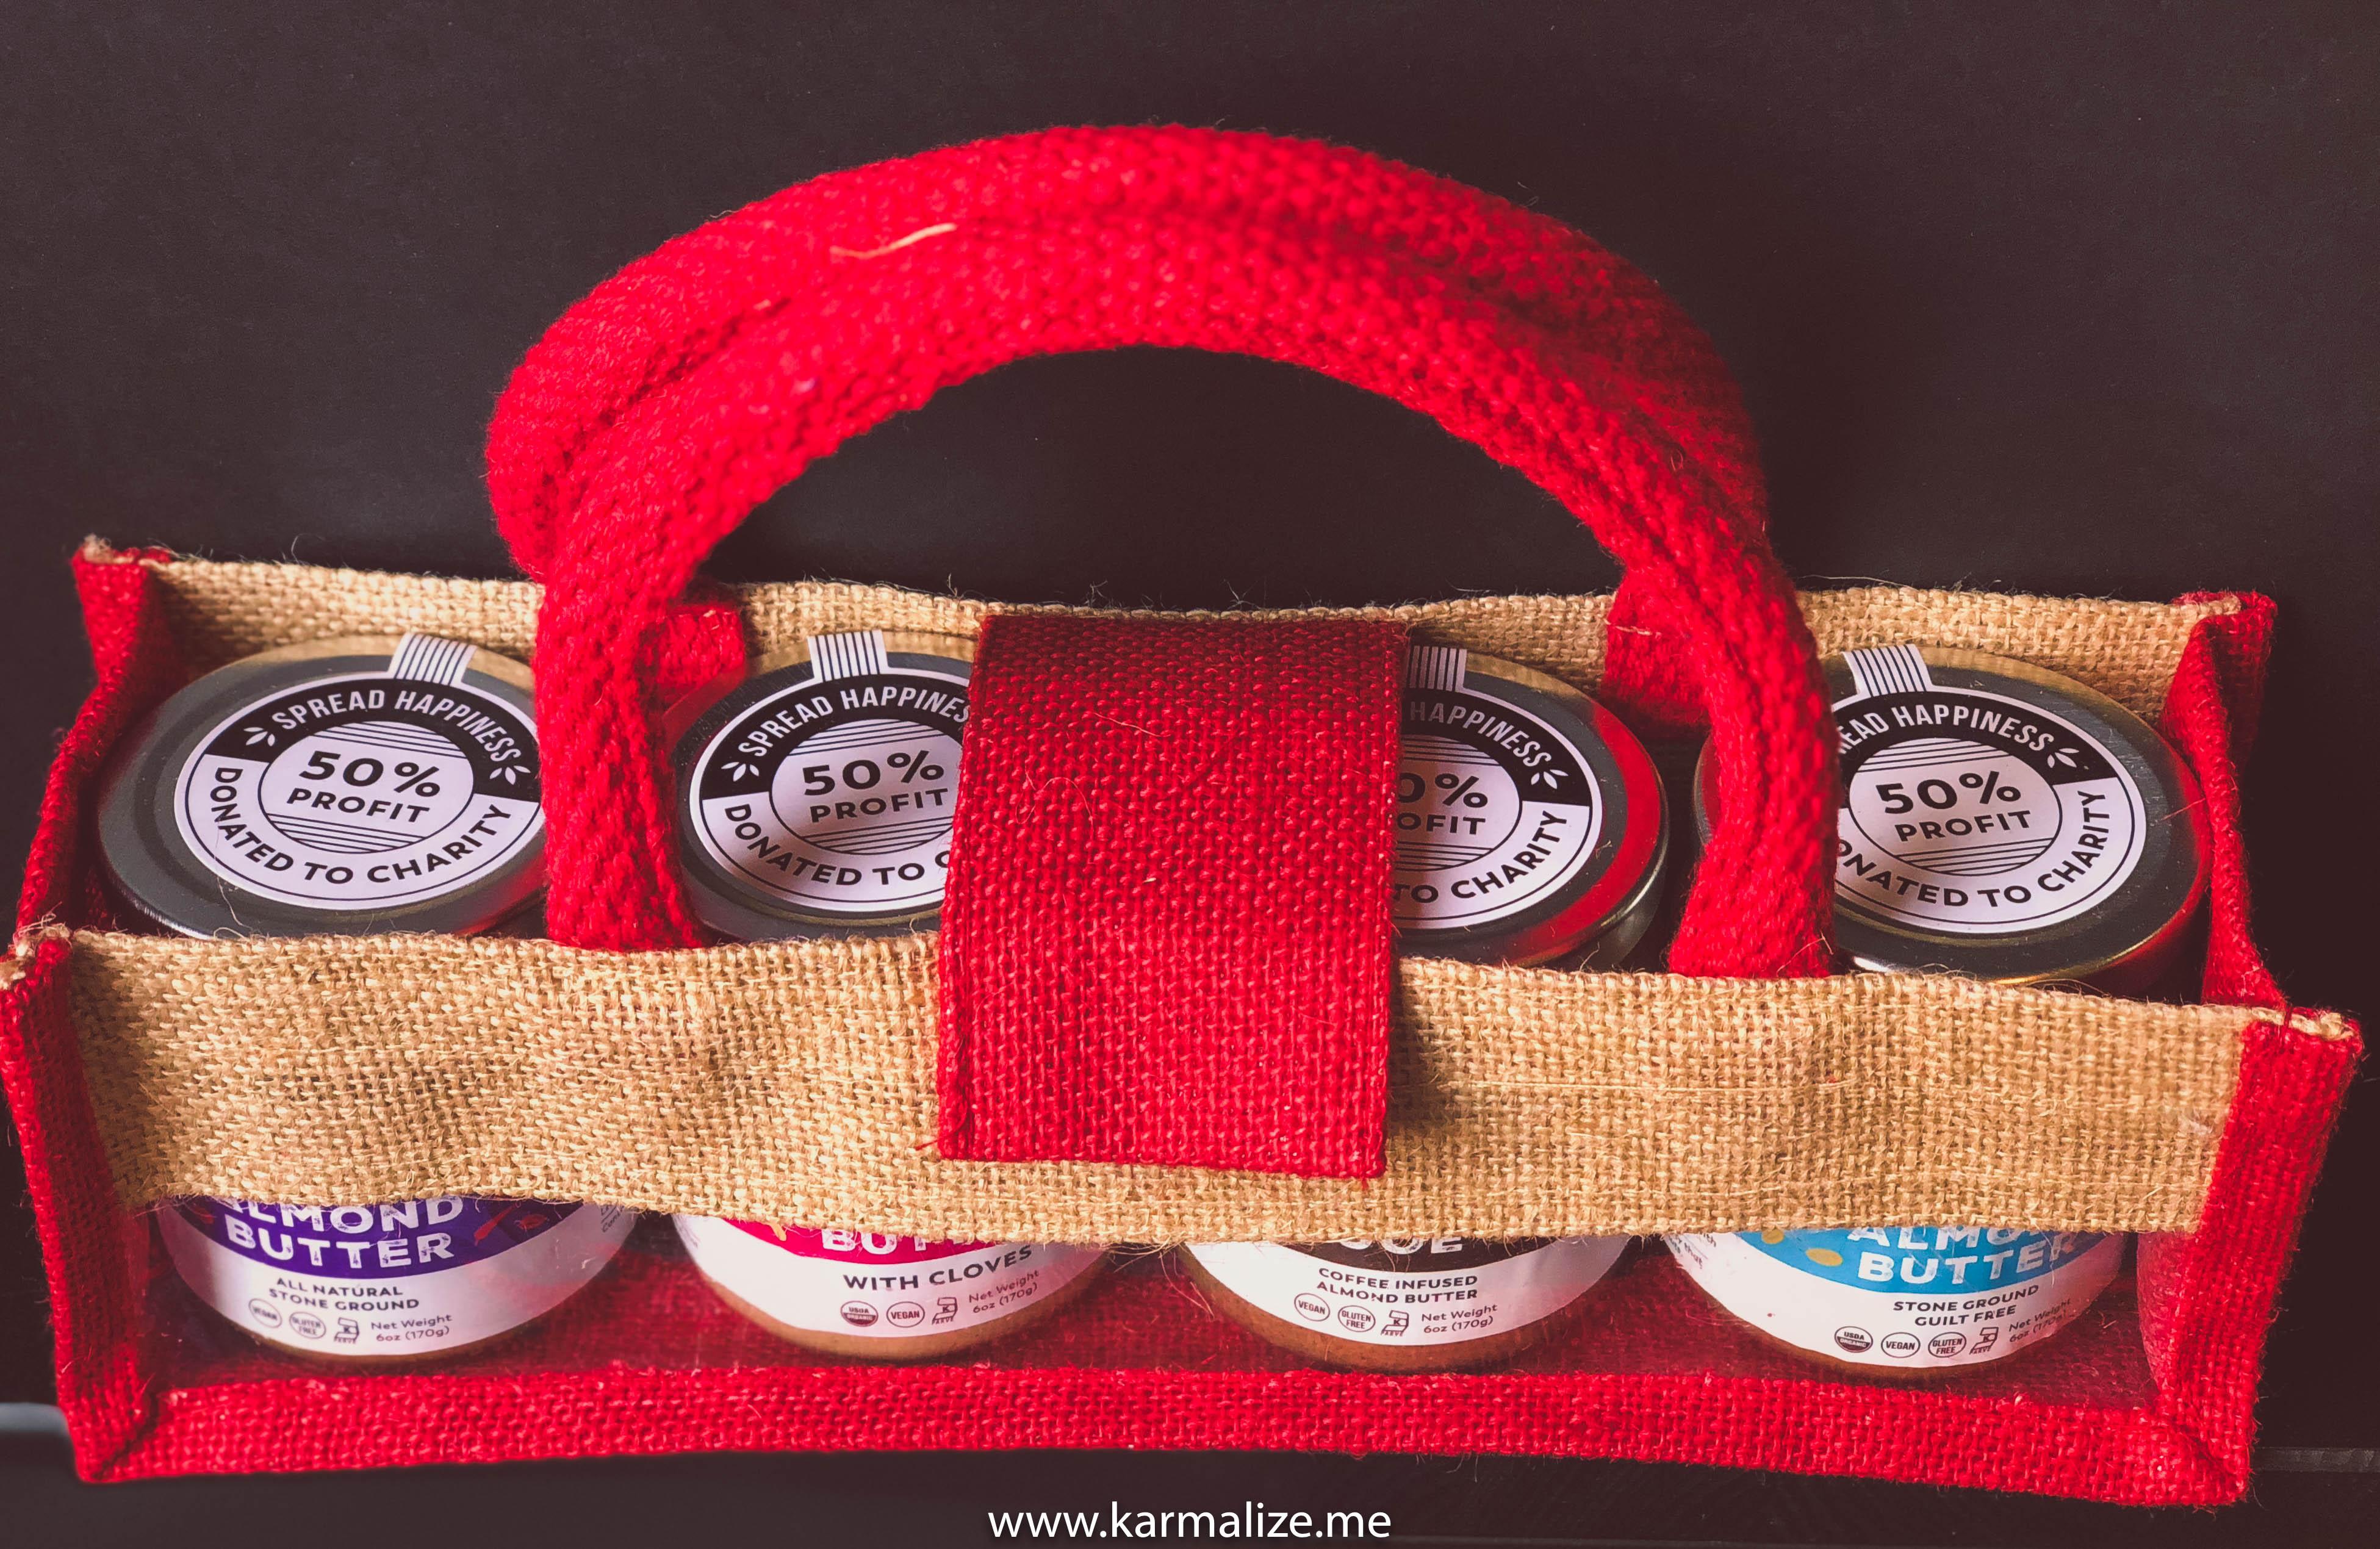 Jute Bag for Nut Butters - (Nut butters not included) - top